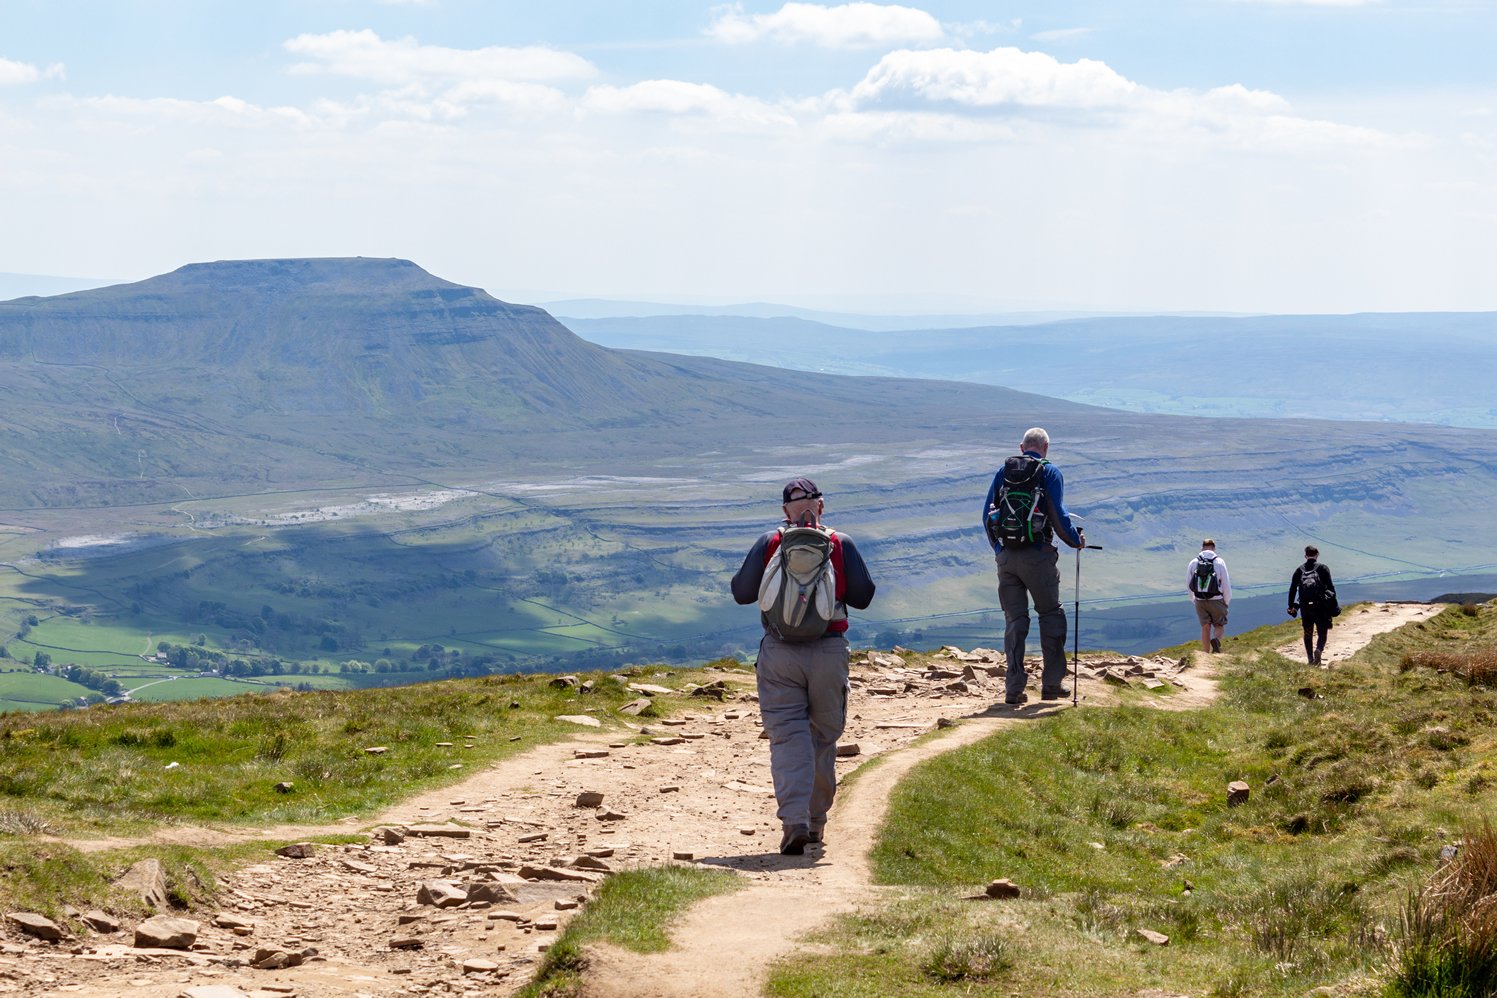 Image name walkers descending whernside view of ingleborough sunny yorkshire the 11 image from the post Stride Out in Yorkshire: Celebrate National Walking Day in Yorkshire.com.